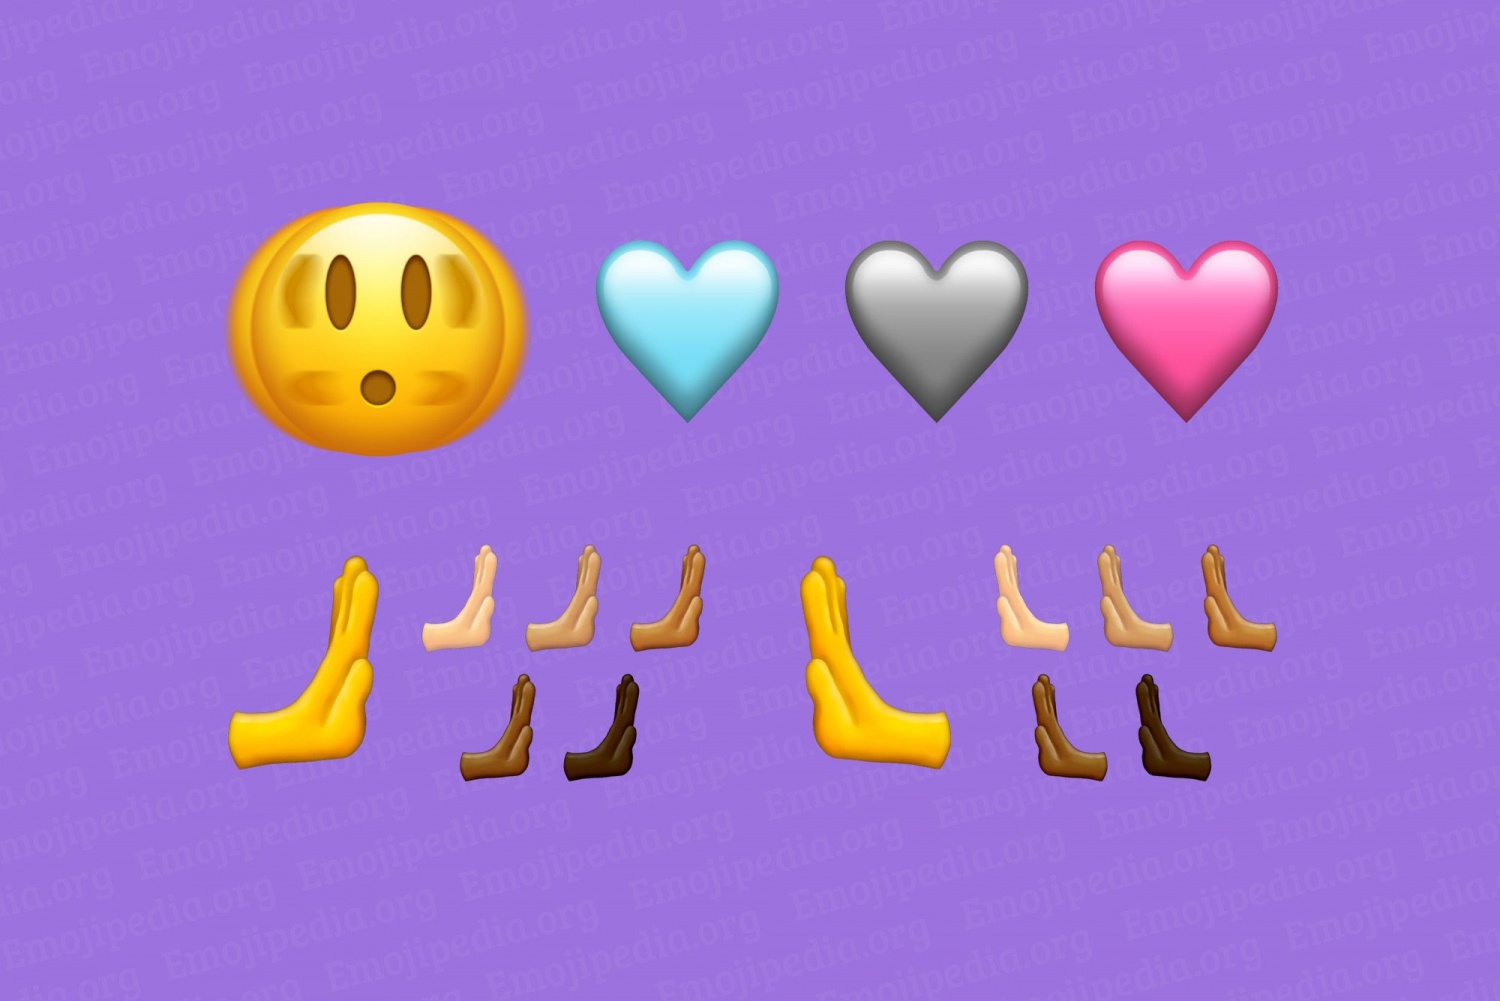 emojipedia-introduces-new-emojis-for-ios-and-android-including-pink